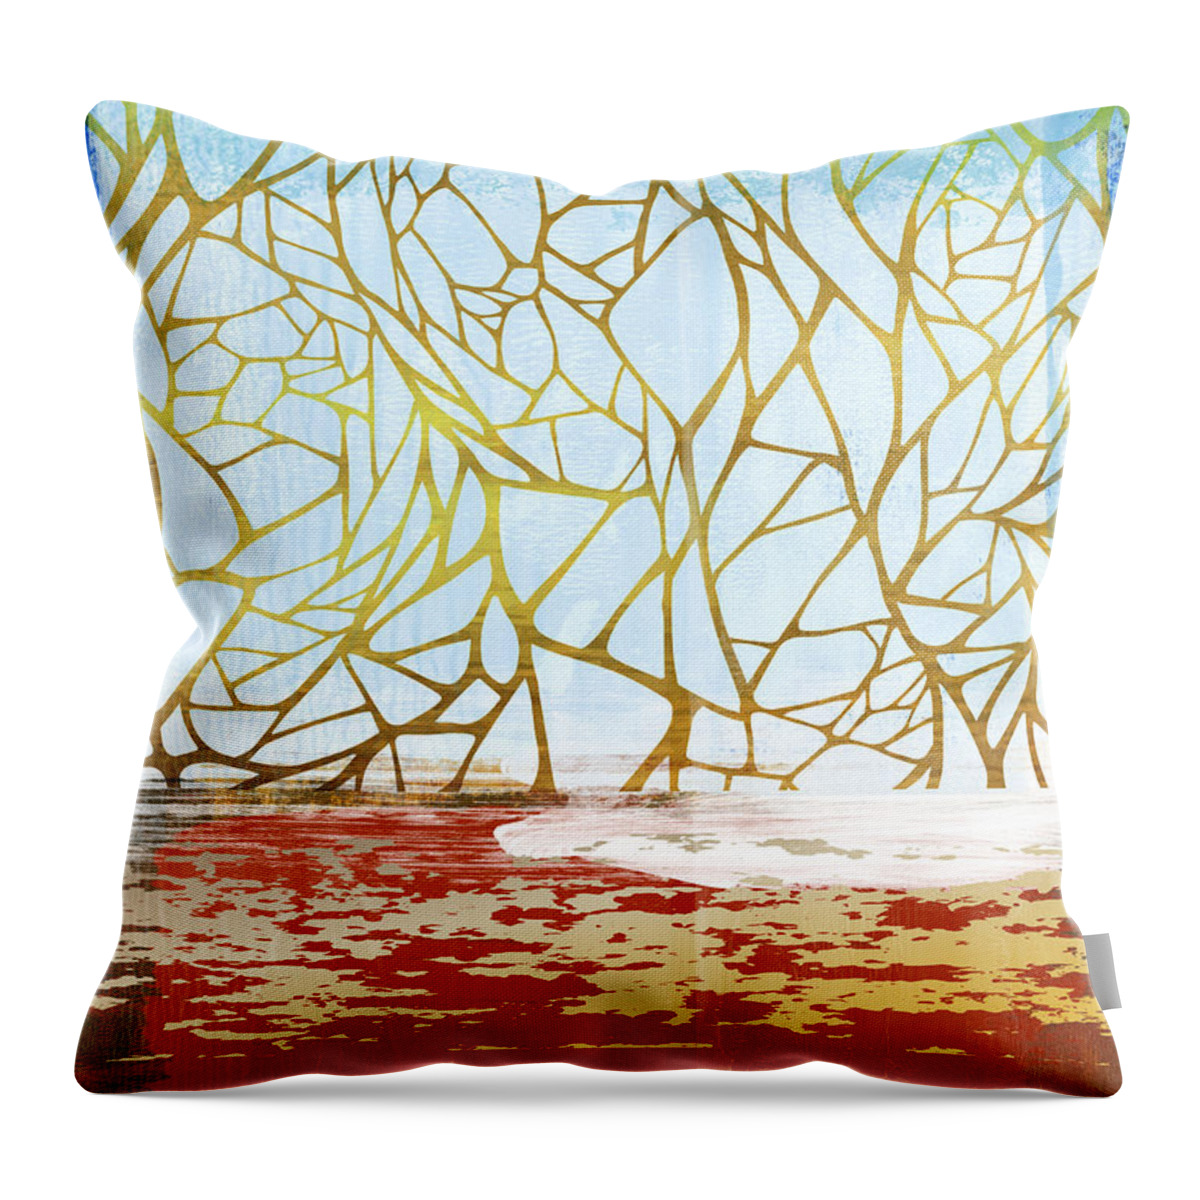 Abstract Throw Pillow featuring the painting Abstract Trees Study by Naxart Studio